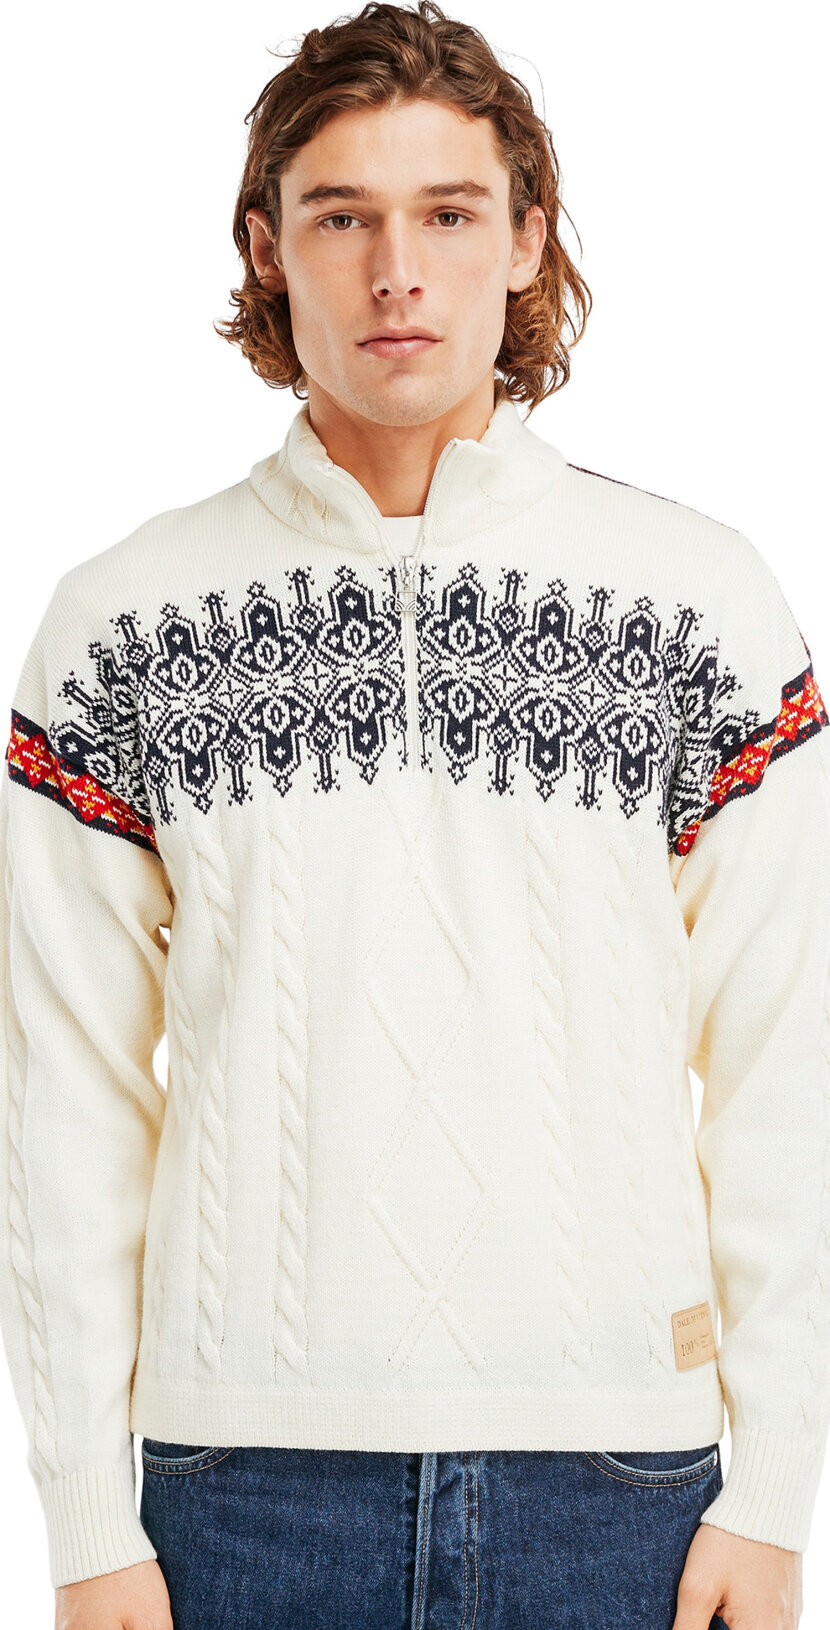 Aspøy Mens Sweater - White by Dale of Norway - COLDSEASON.com, 199,90 €